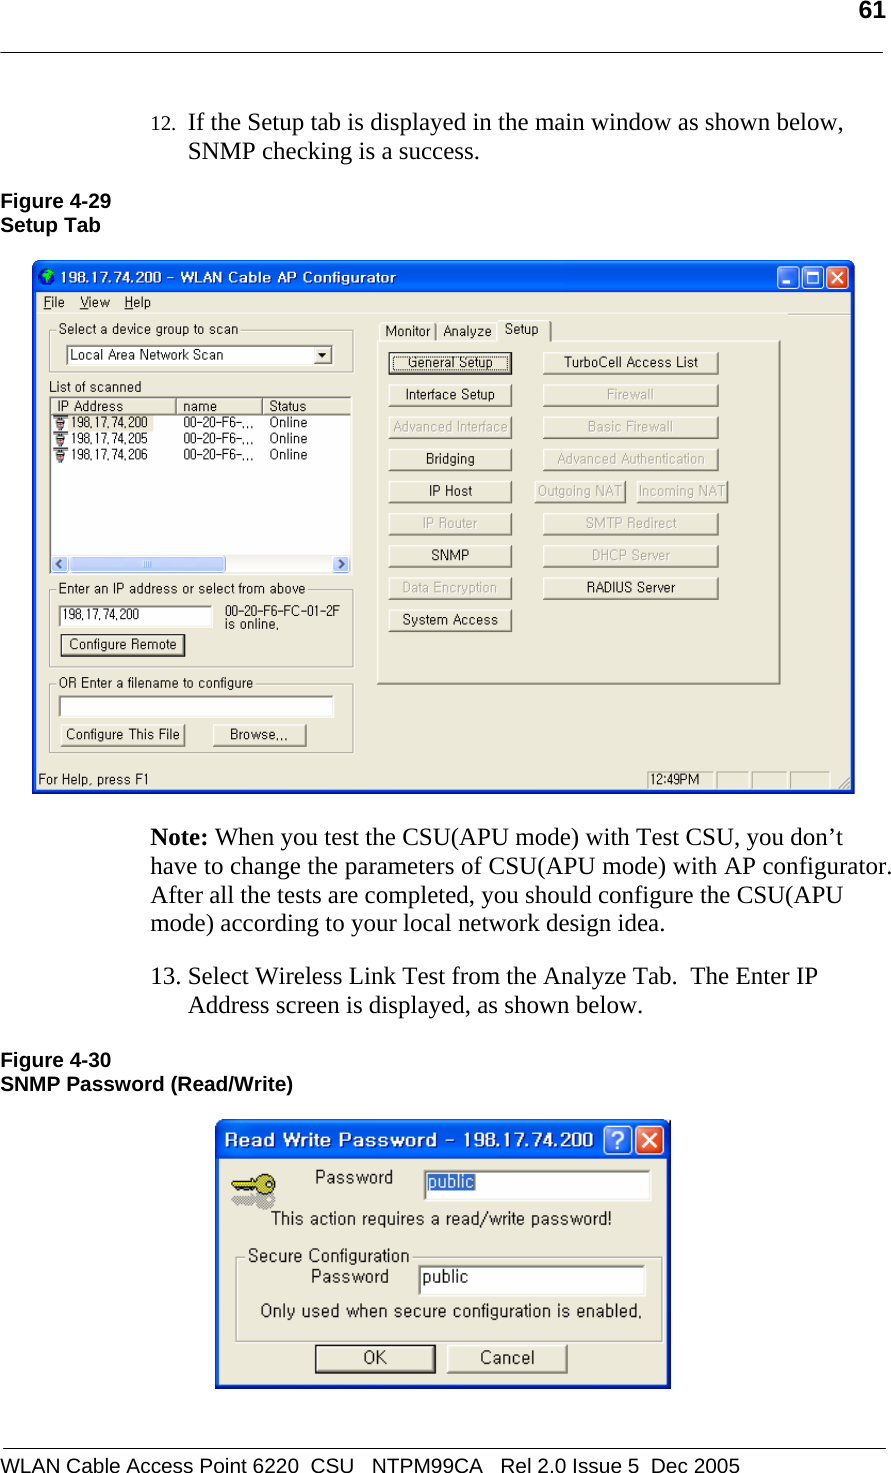   61  WLAN Cable Access Point 6220  CSU   NTPM99CA   Rel 2.0 Issue 5  Dec 2005 12. If the Setup tab is displayed in the main window as shown below, SNMP checking is a success.  Figure 4-29 Setup Tab     Note: When you test the CSU(APU mode) with Test CSU, you don’t have to change the parameters of CSU(APU mode) with AP configurator. After all the tests are completed, you should configure the CSU(APU mode) according to your local network design idea.    13. Select Wireless Link Test from the Analyze Tab.  The Enter IP Address screen is displayed, as shown below.  Figure 4-30 SNMP Password (Read/Write)    